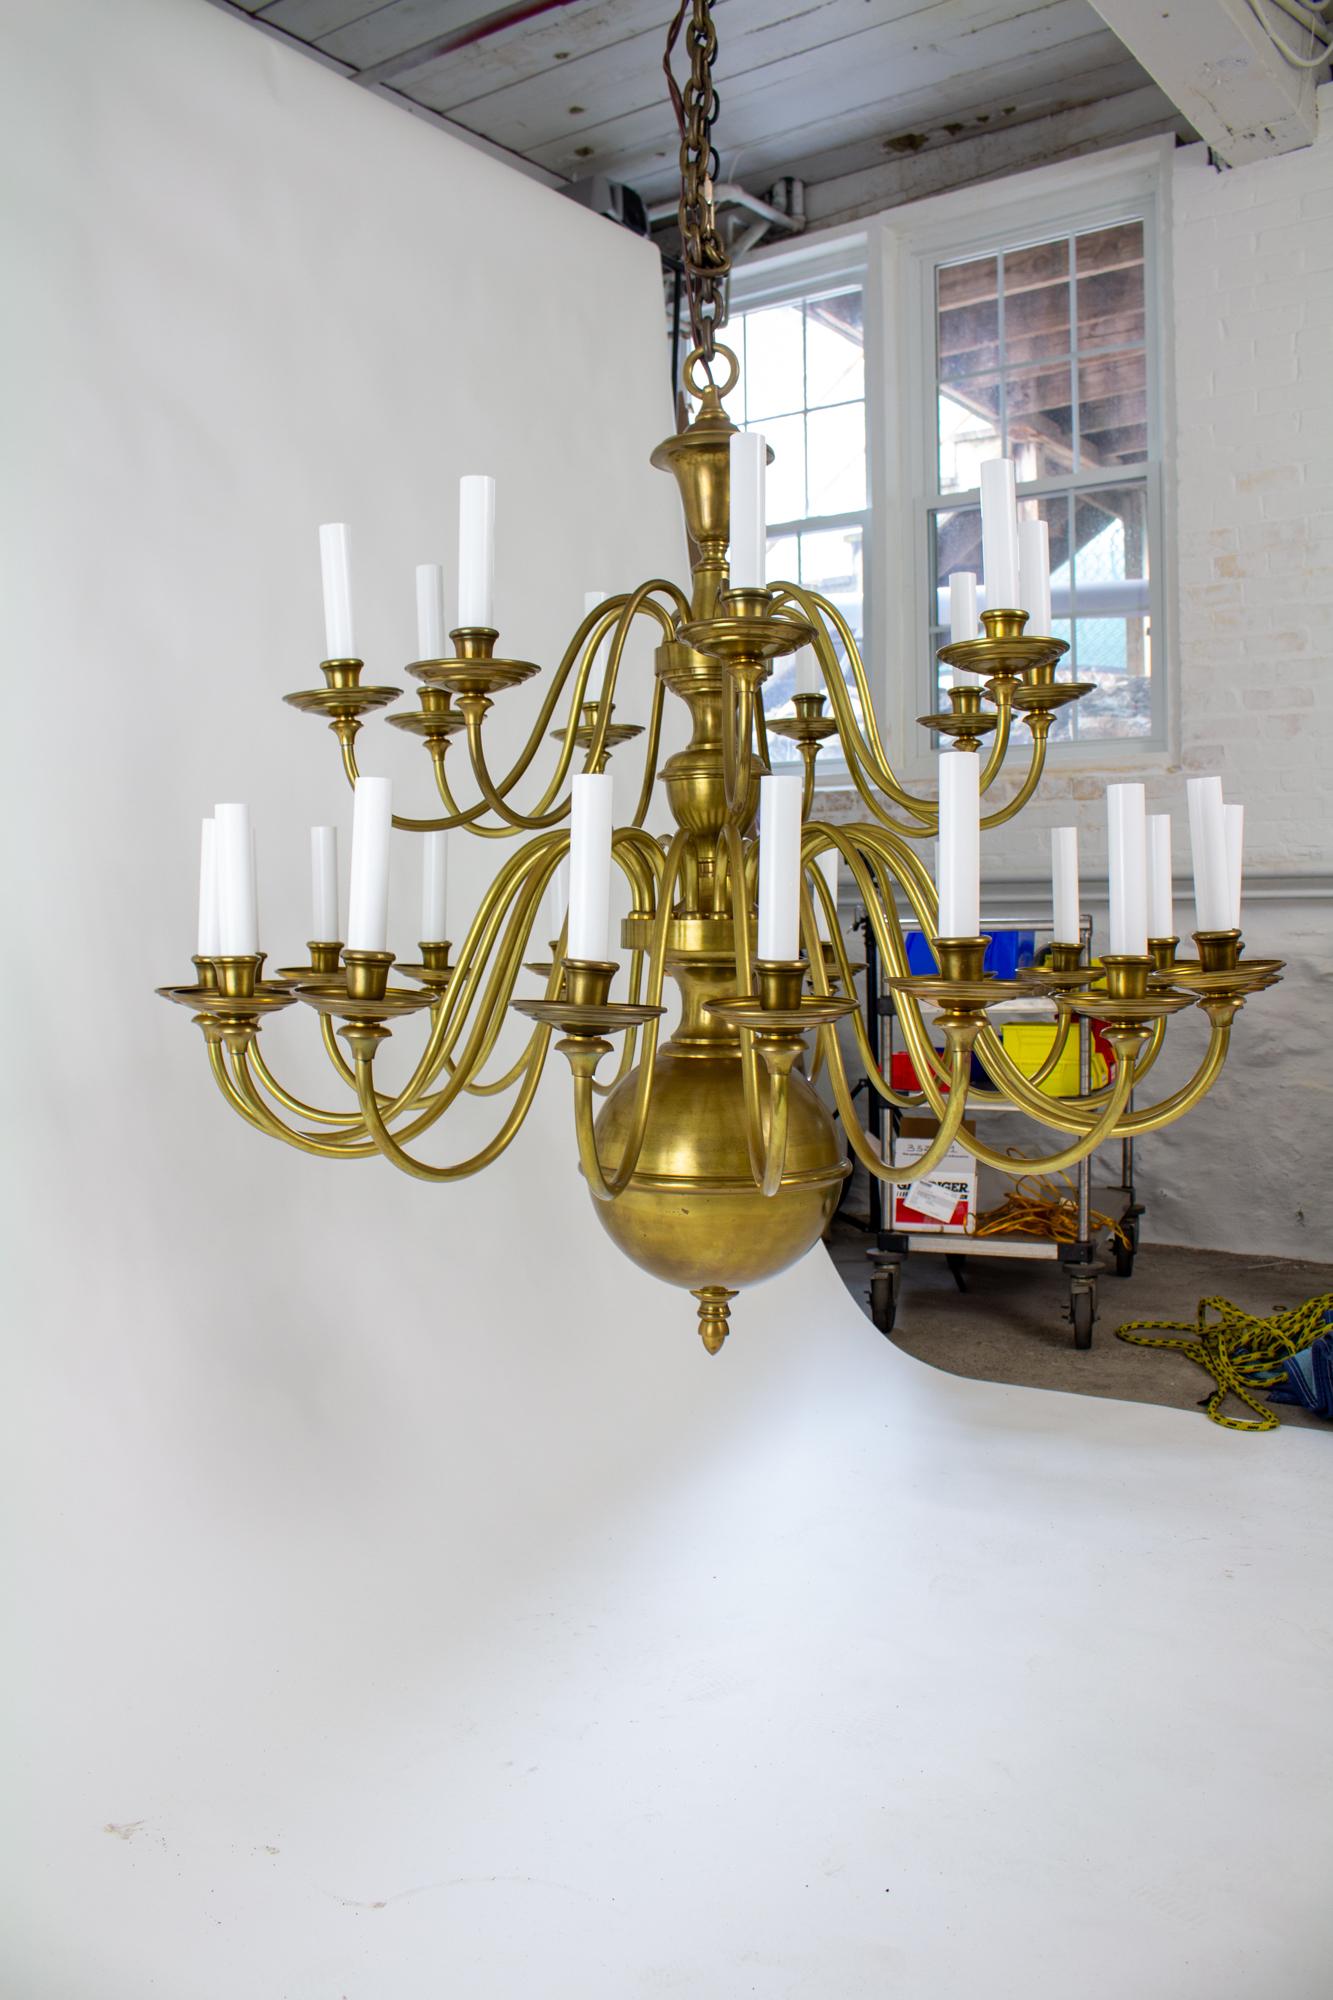 Early 20th Century large two tier colonial style brass chandelier. The scale of this chandelier is appropriate for a great room, barn, or other large space. The top tier has nine arms and the bottom tier has 18 arms. The central stem is made of